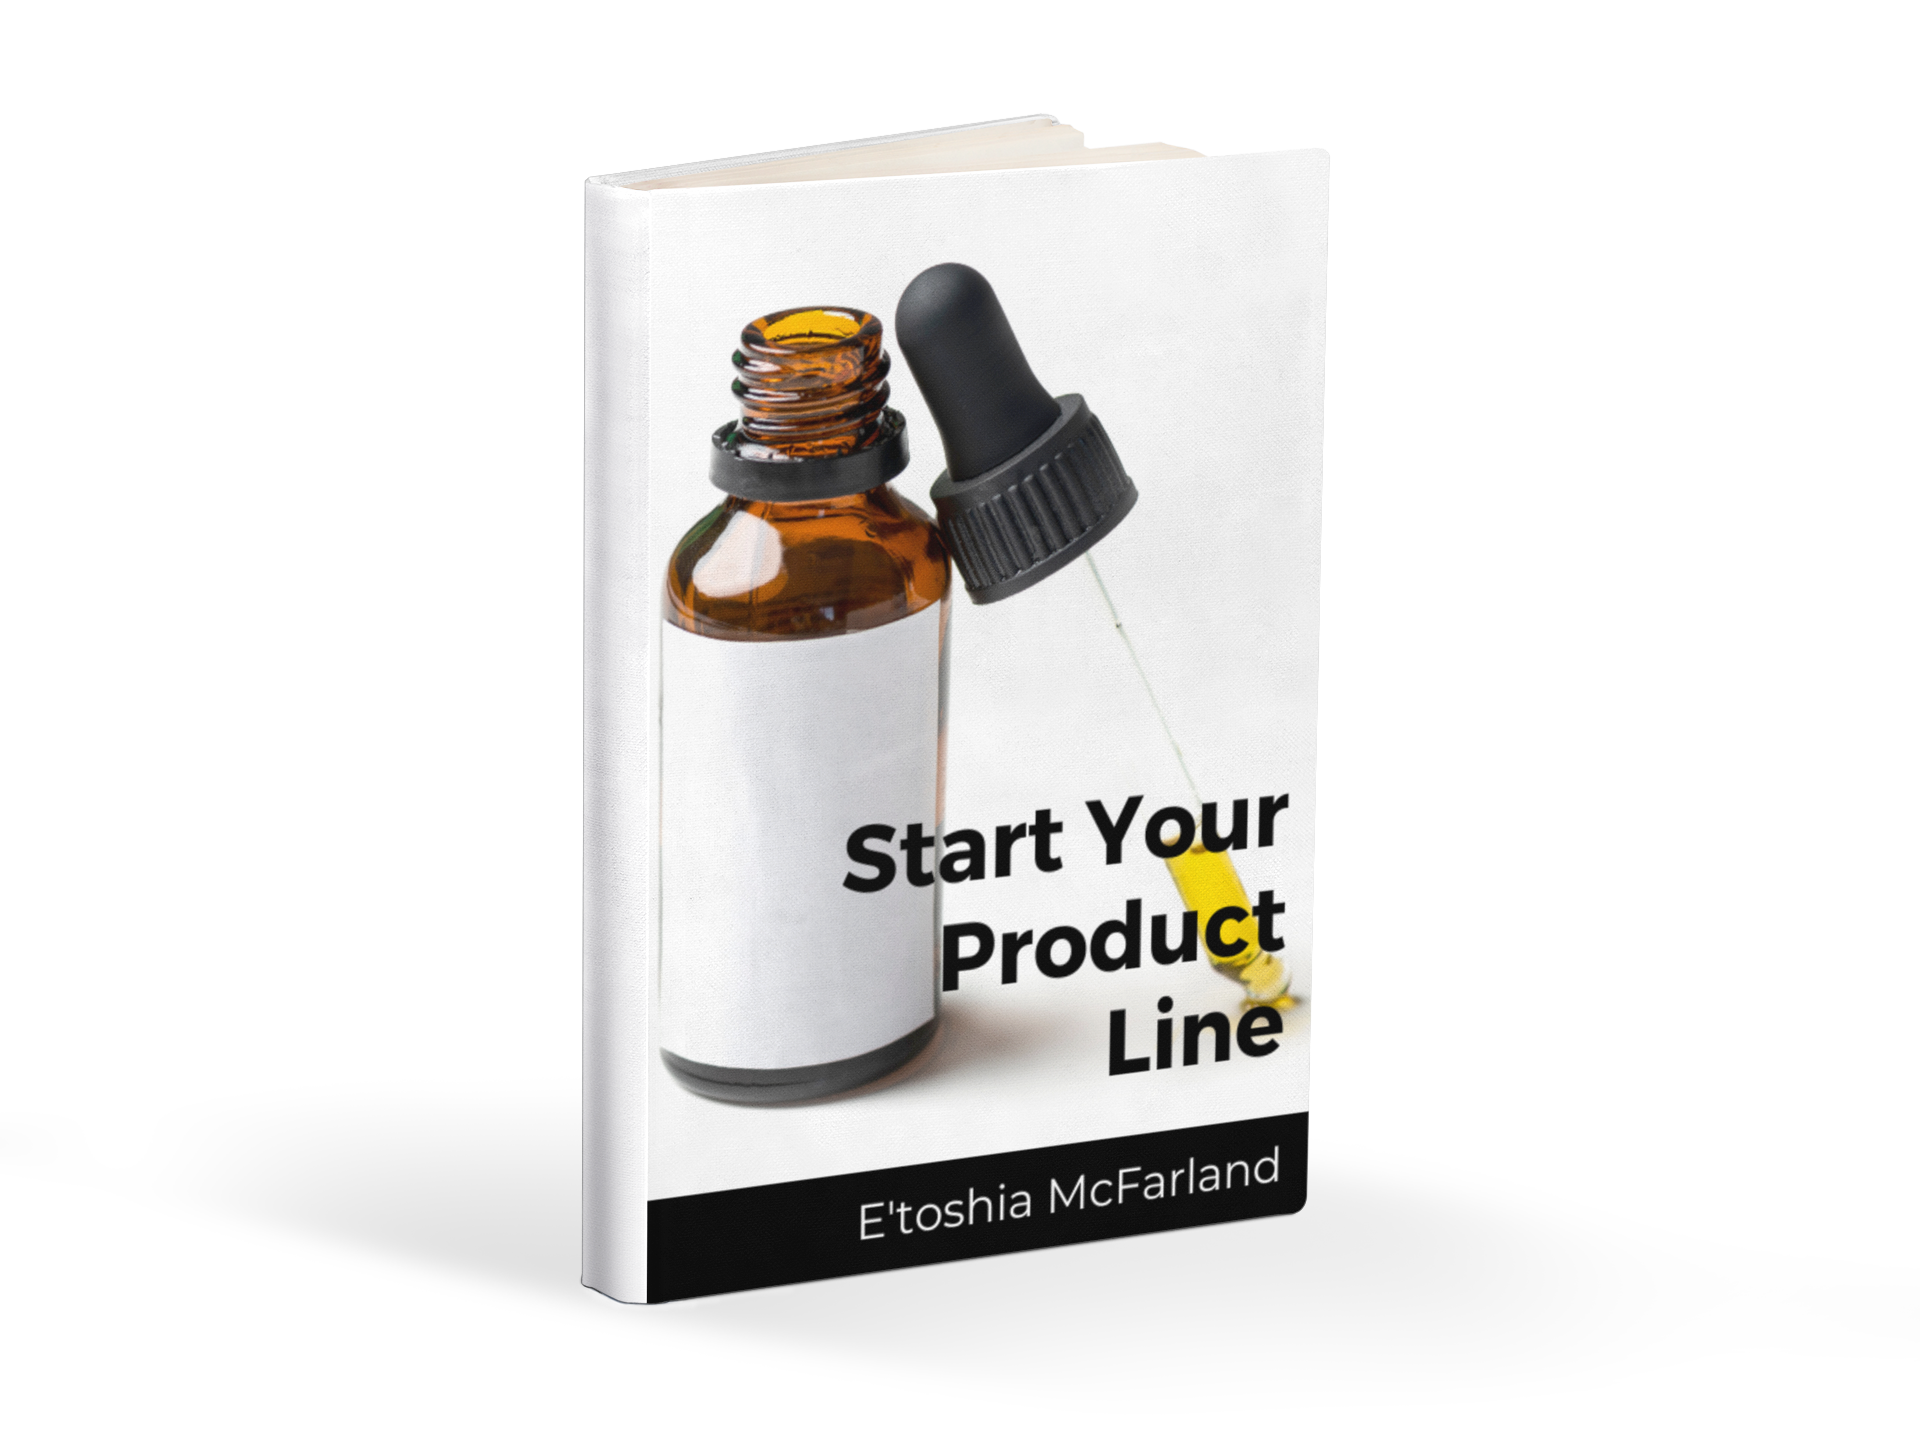 Start Your Private Product Line